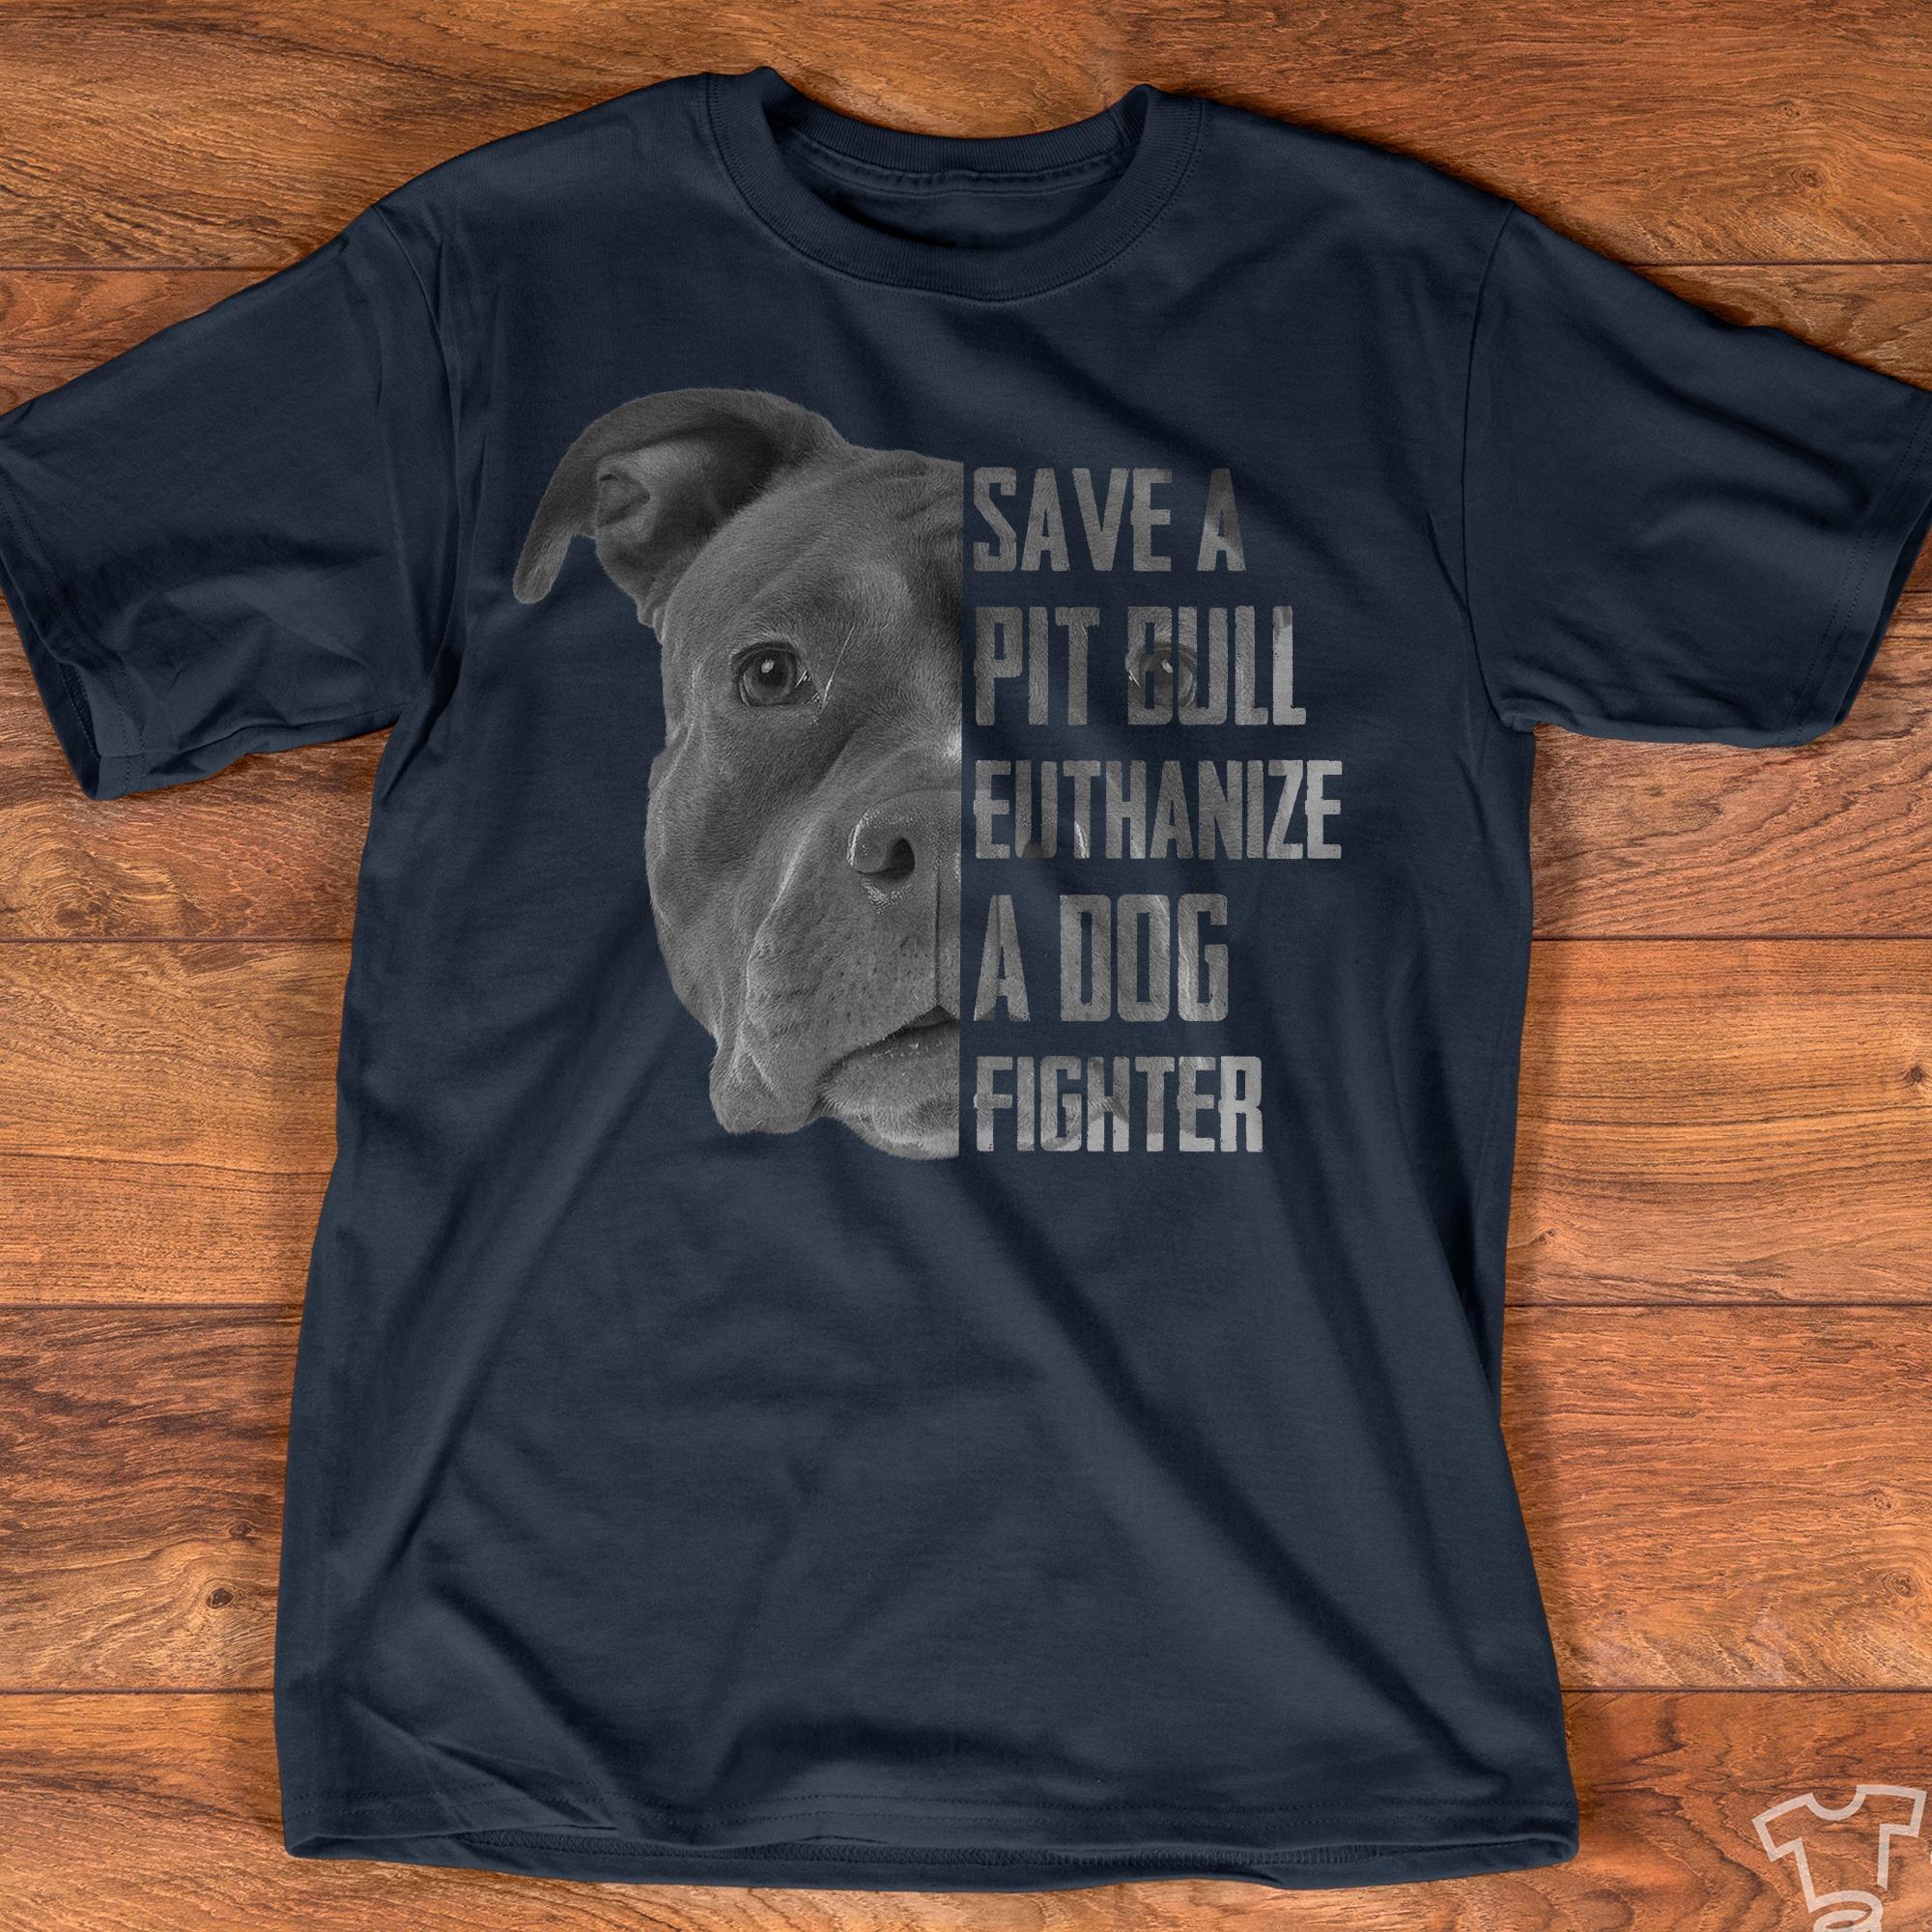 Save a Pitbull, euthanize a dog fighter - Dog saving T-shirt, gift for dog lover